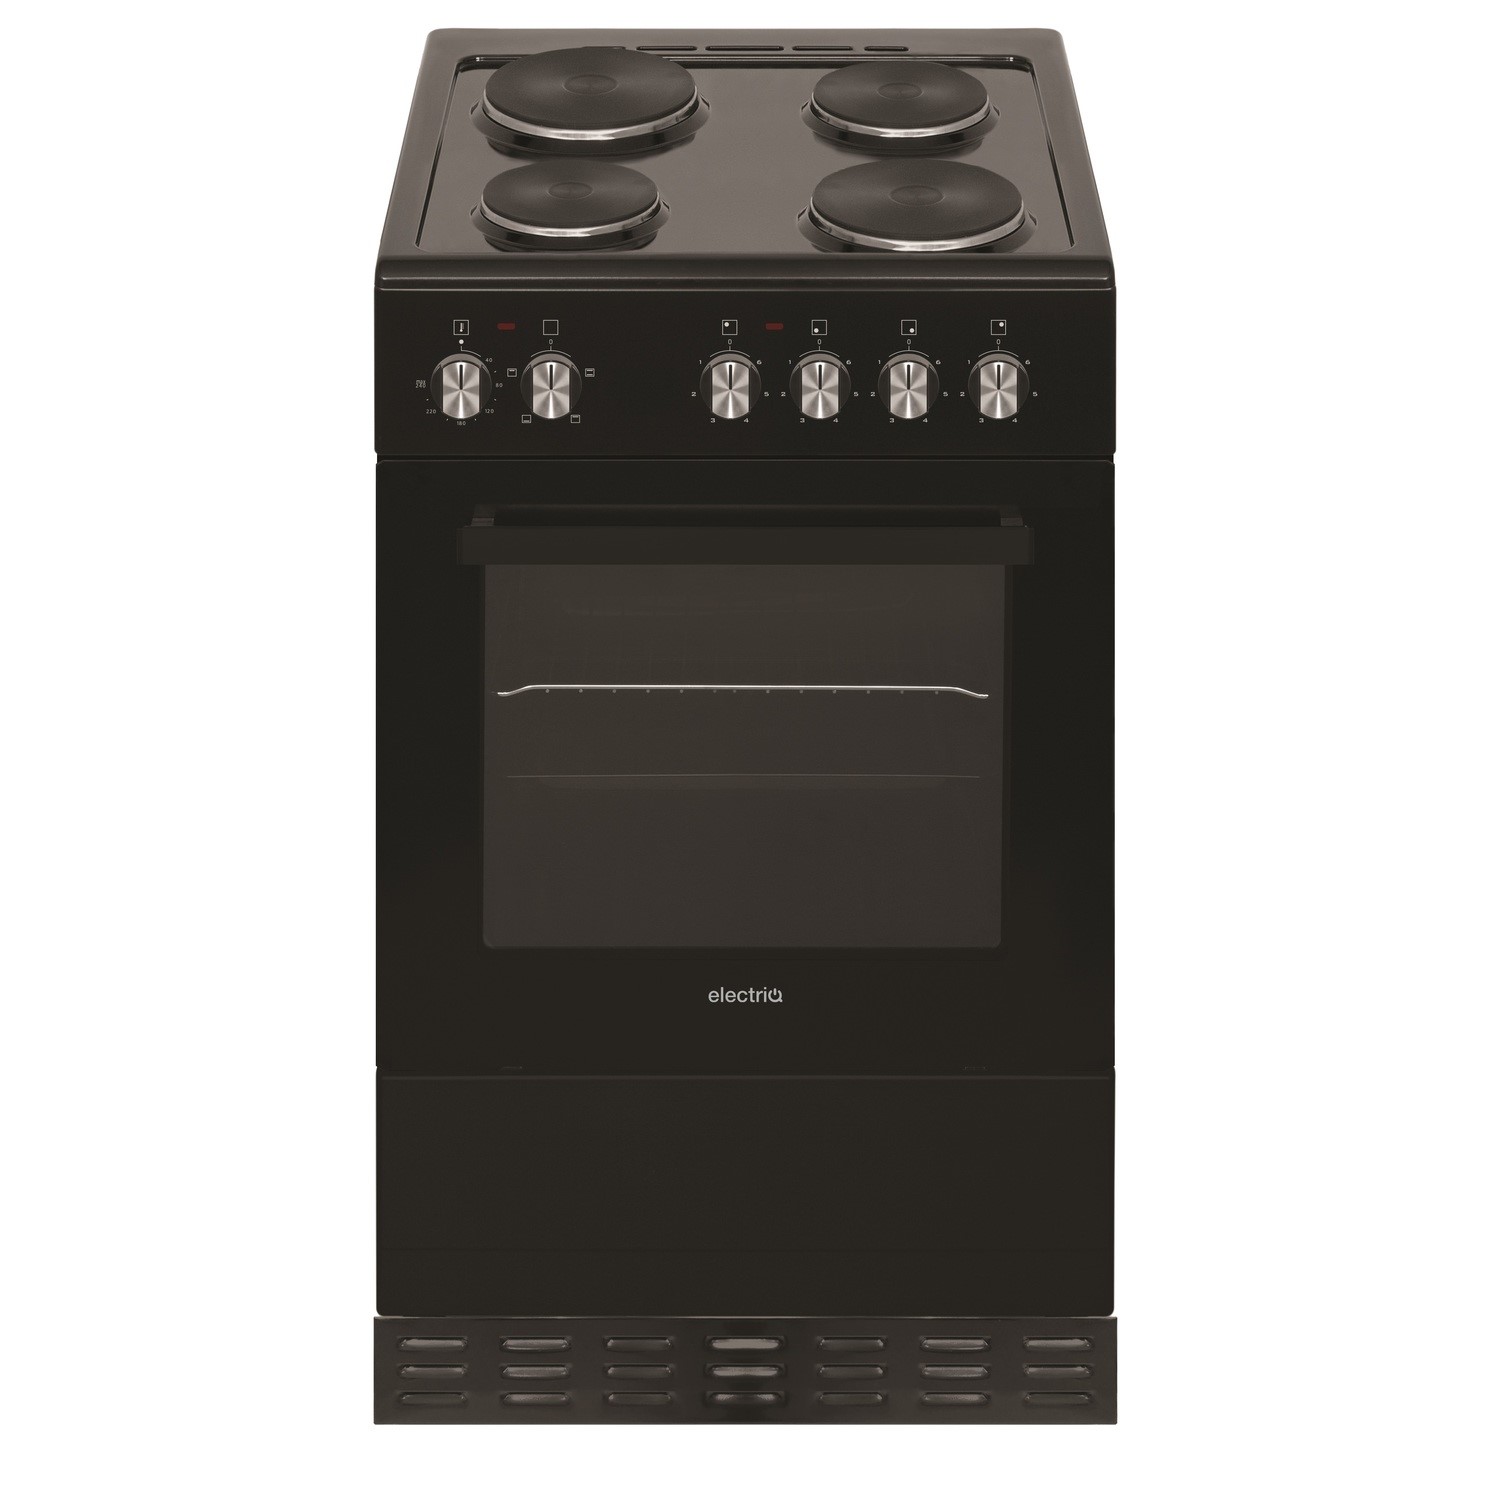 electriQ 50cm Single Oven Electric Cooker with Solid Hotplate Hob Black 